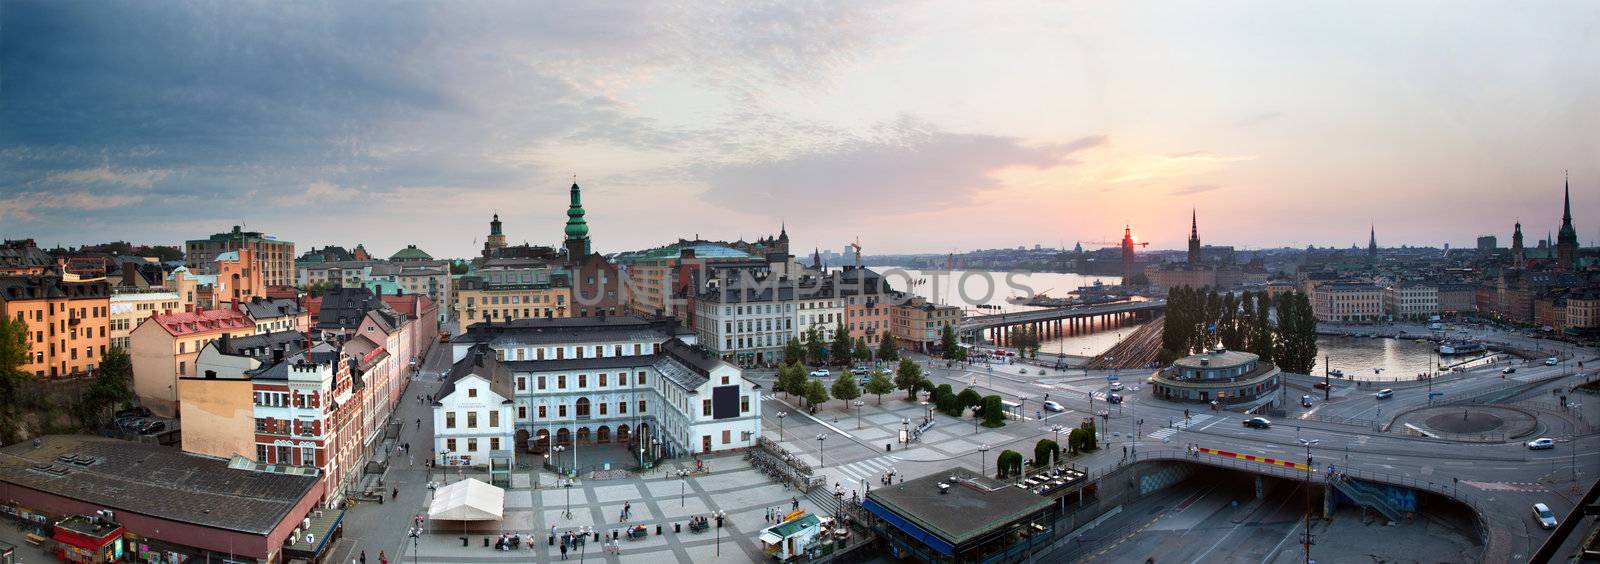 Stockholm, Sweden wide panorama at sunset by photocreo